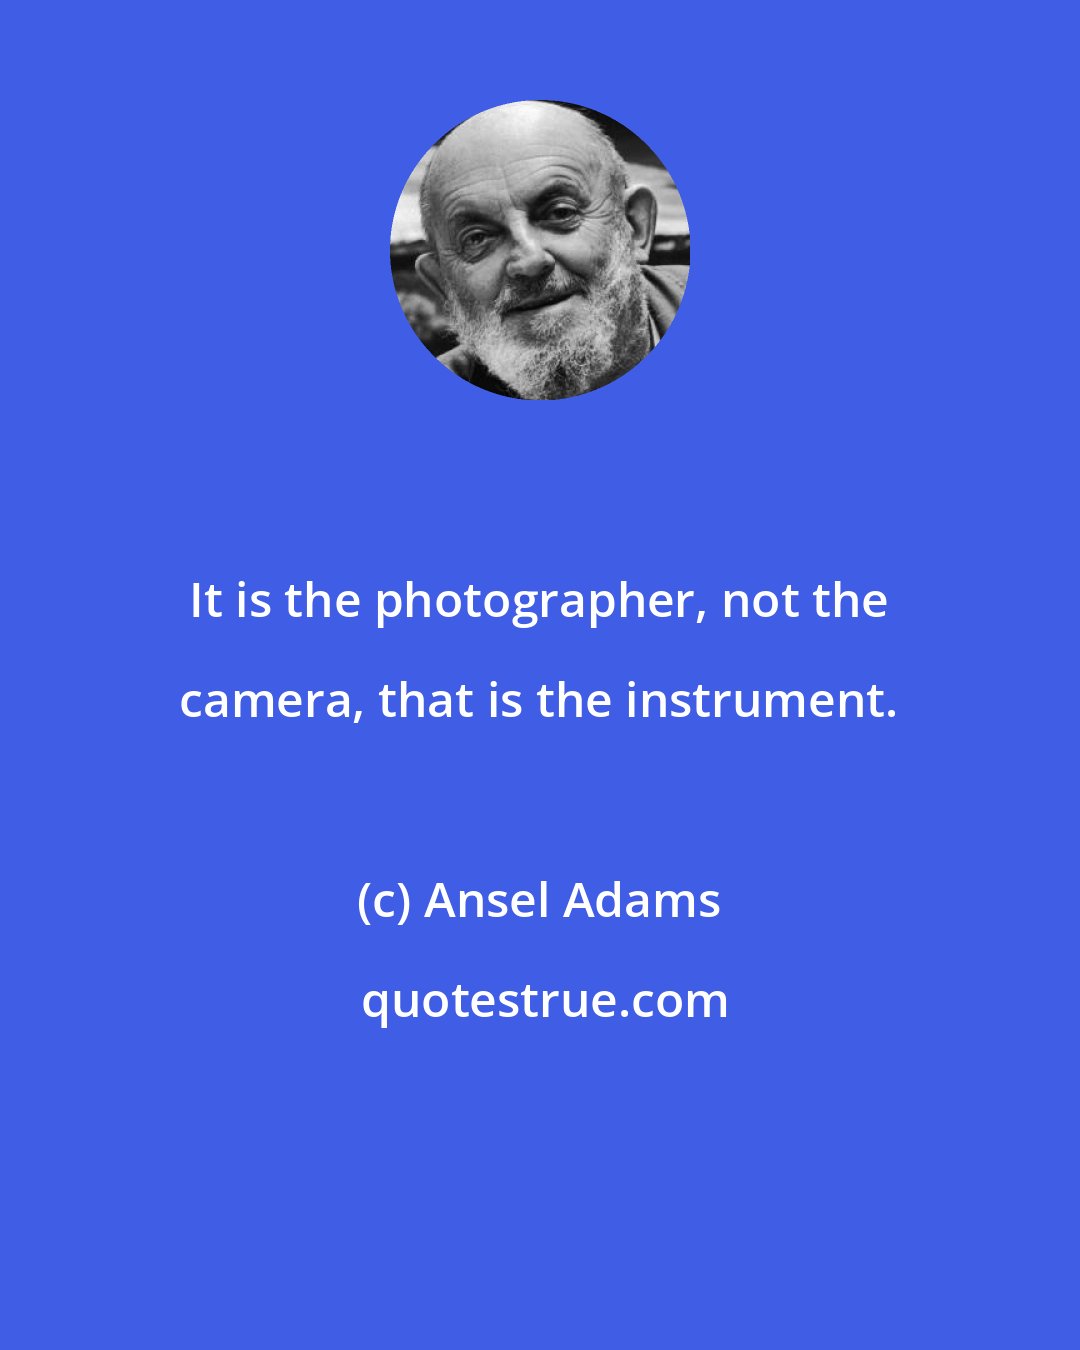 Ansel Adams: It is the photographer, not the camera, that is the instrument.